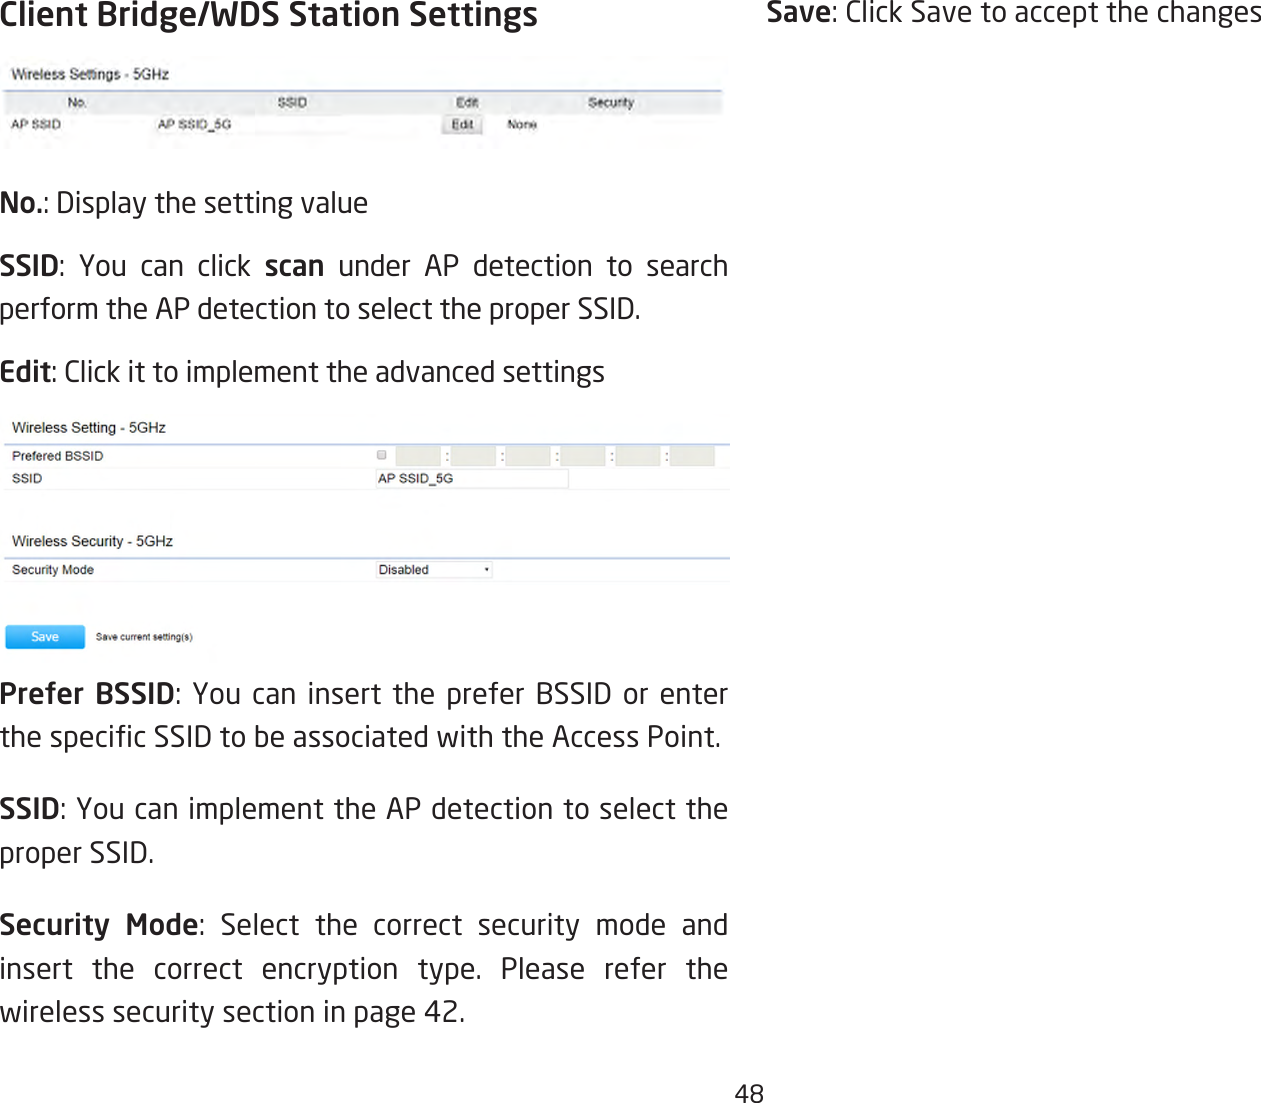 48Client Bridge/WDS Station SettingsNo.: Display the setting valueSSID: You can click scan under AP detection to search perform the AP detection to select the proper SSID.Edit: Click it to implement the advanced settingsPrefer BSSID:You can insert the prefer BSSID orenterthespecicSSIDtobeassociatedwiththeAccessPoint.SSID:YoucanimplementtheAPdetectiontoselecttheproper SSID.Security Mode: Select the correct security mode and insert the correct encryption type. Please refer the wireless security section in page 42.Save: Click Save to accept the changes